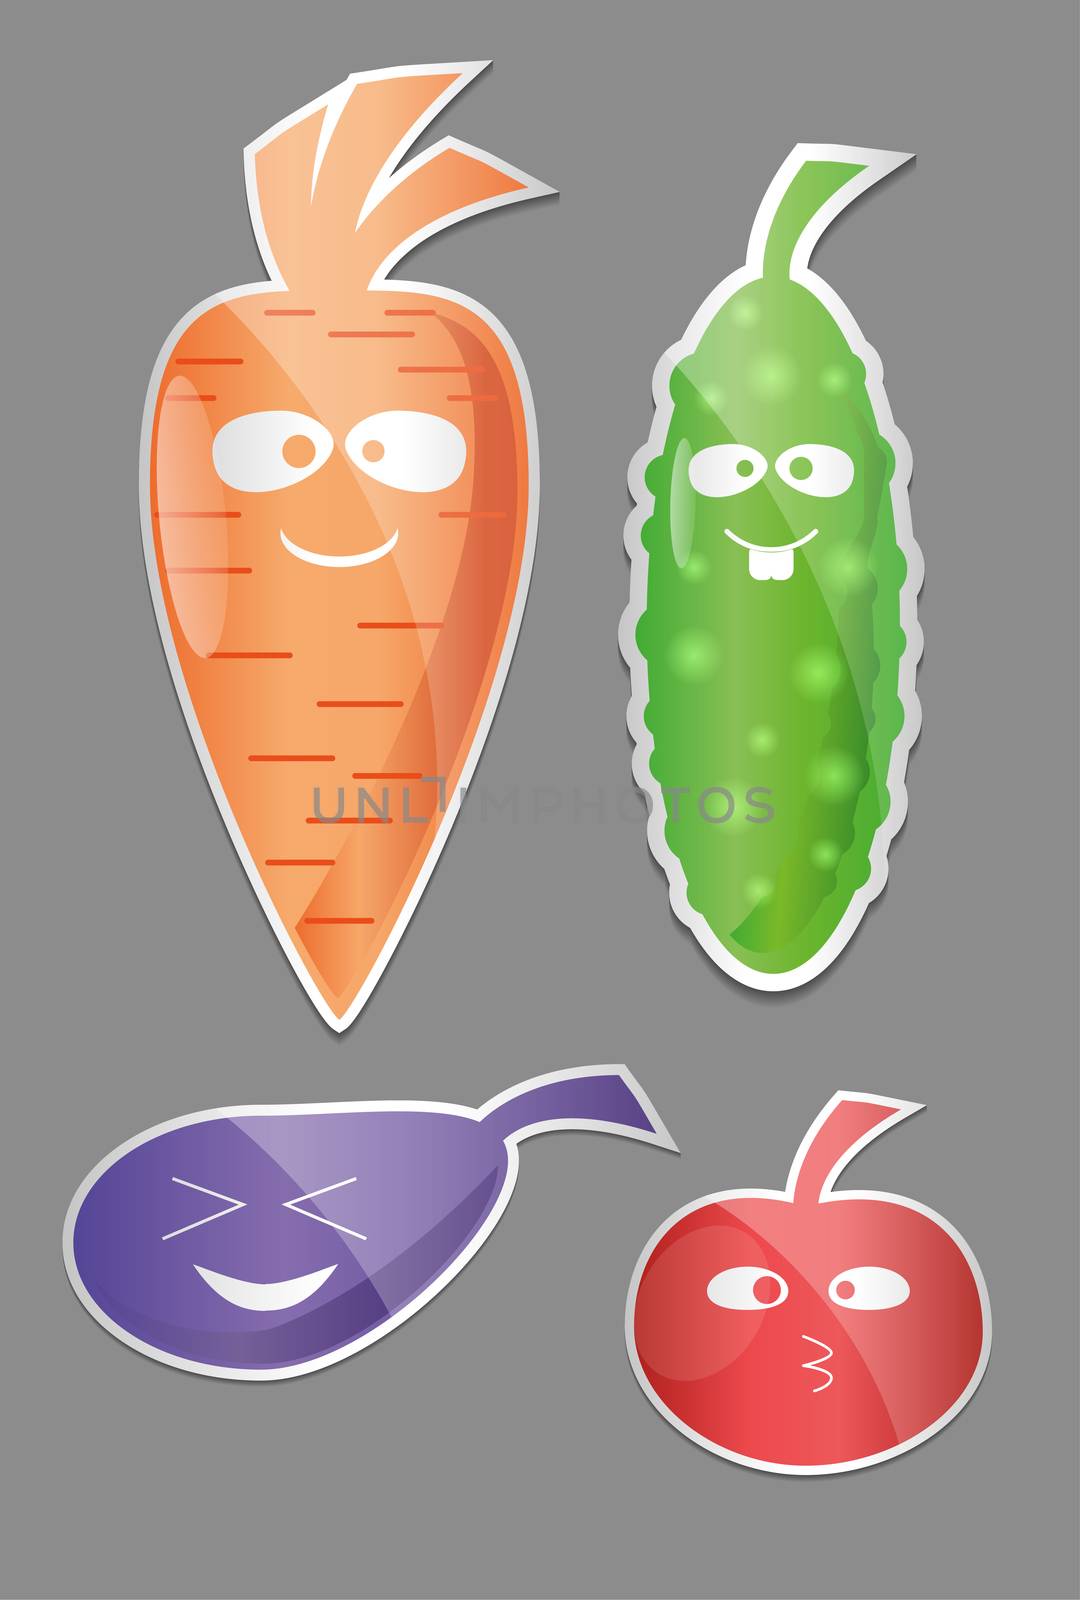 Vegetable icon set. Labels with Vegetables Carrot, cucumber, tomato, eggplant Flat style. illustration